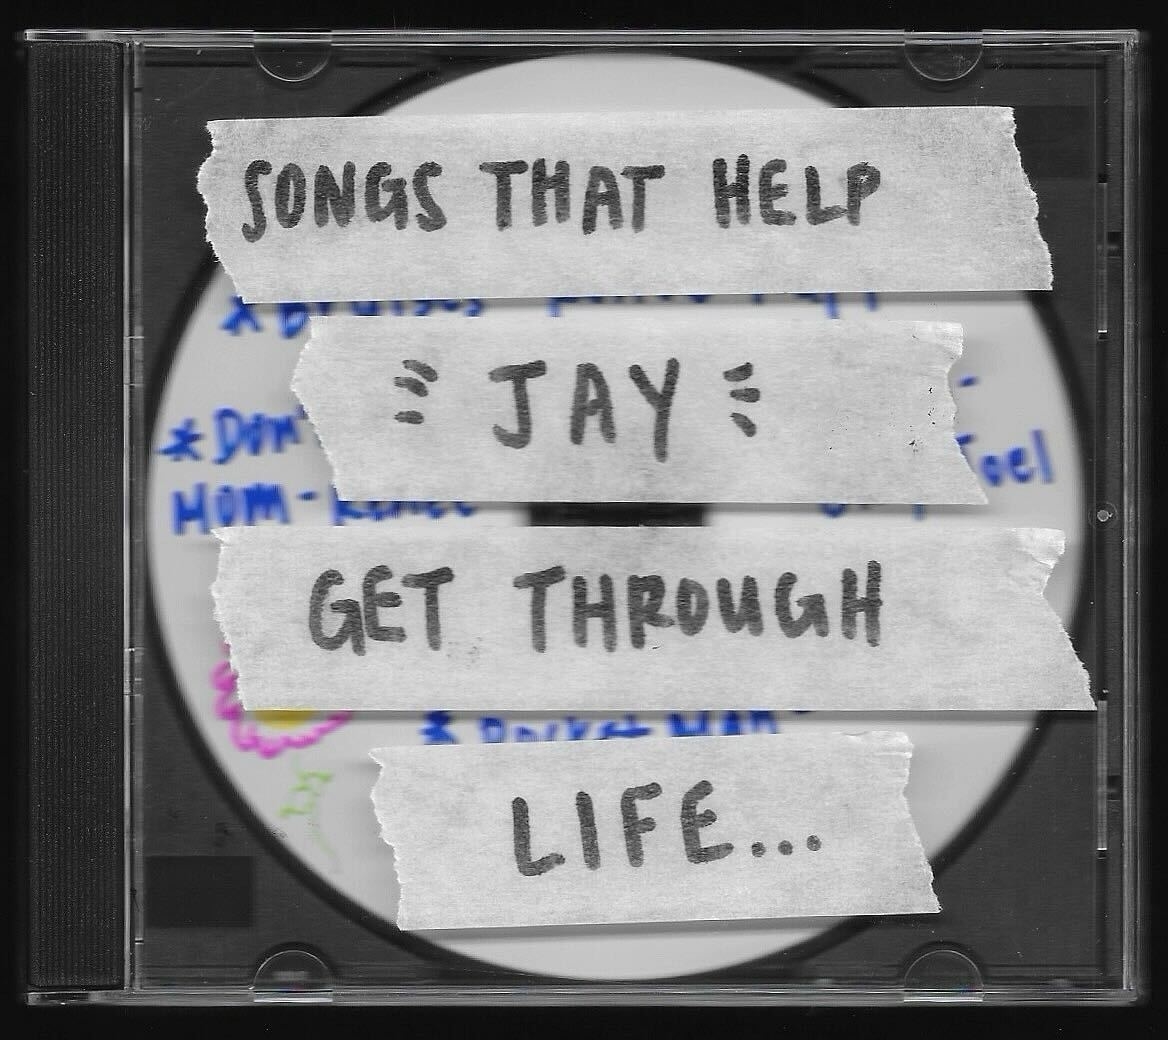 CD case labeled &quot;SONGS THAT HELP GET THROUGH LIFE&quot; with a name written in the center, surrounded by hearts